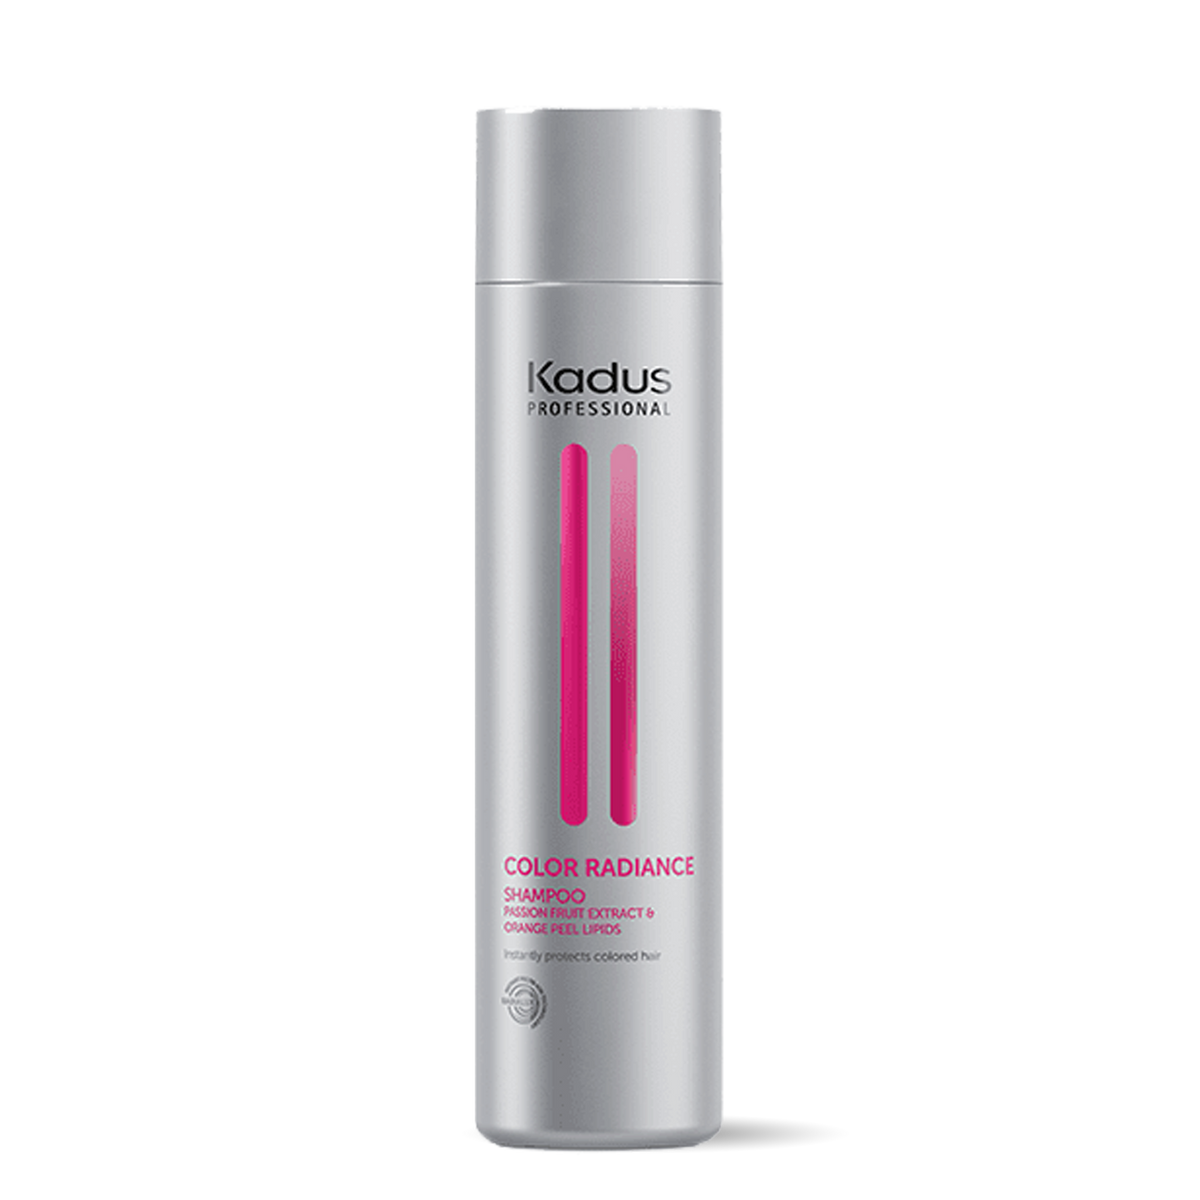 Kadus Color Radiance Shampoo 250ml - by Kadus Professionals |ProCare Outlet|